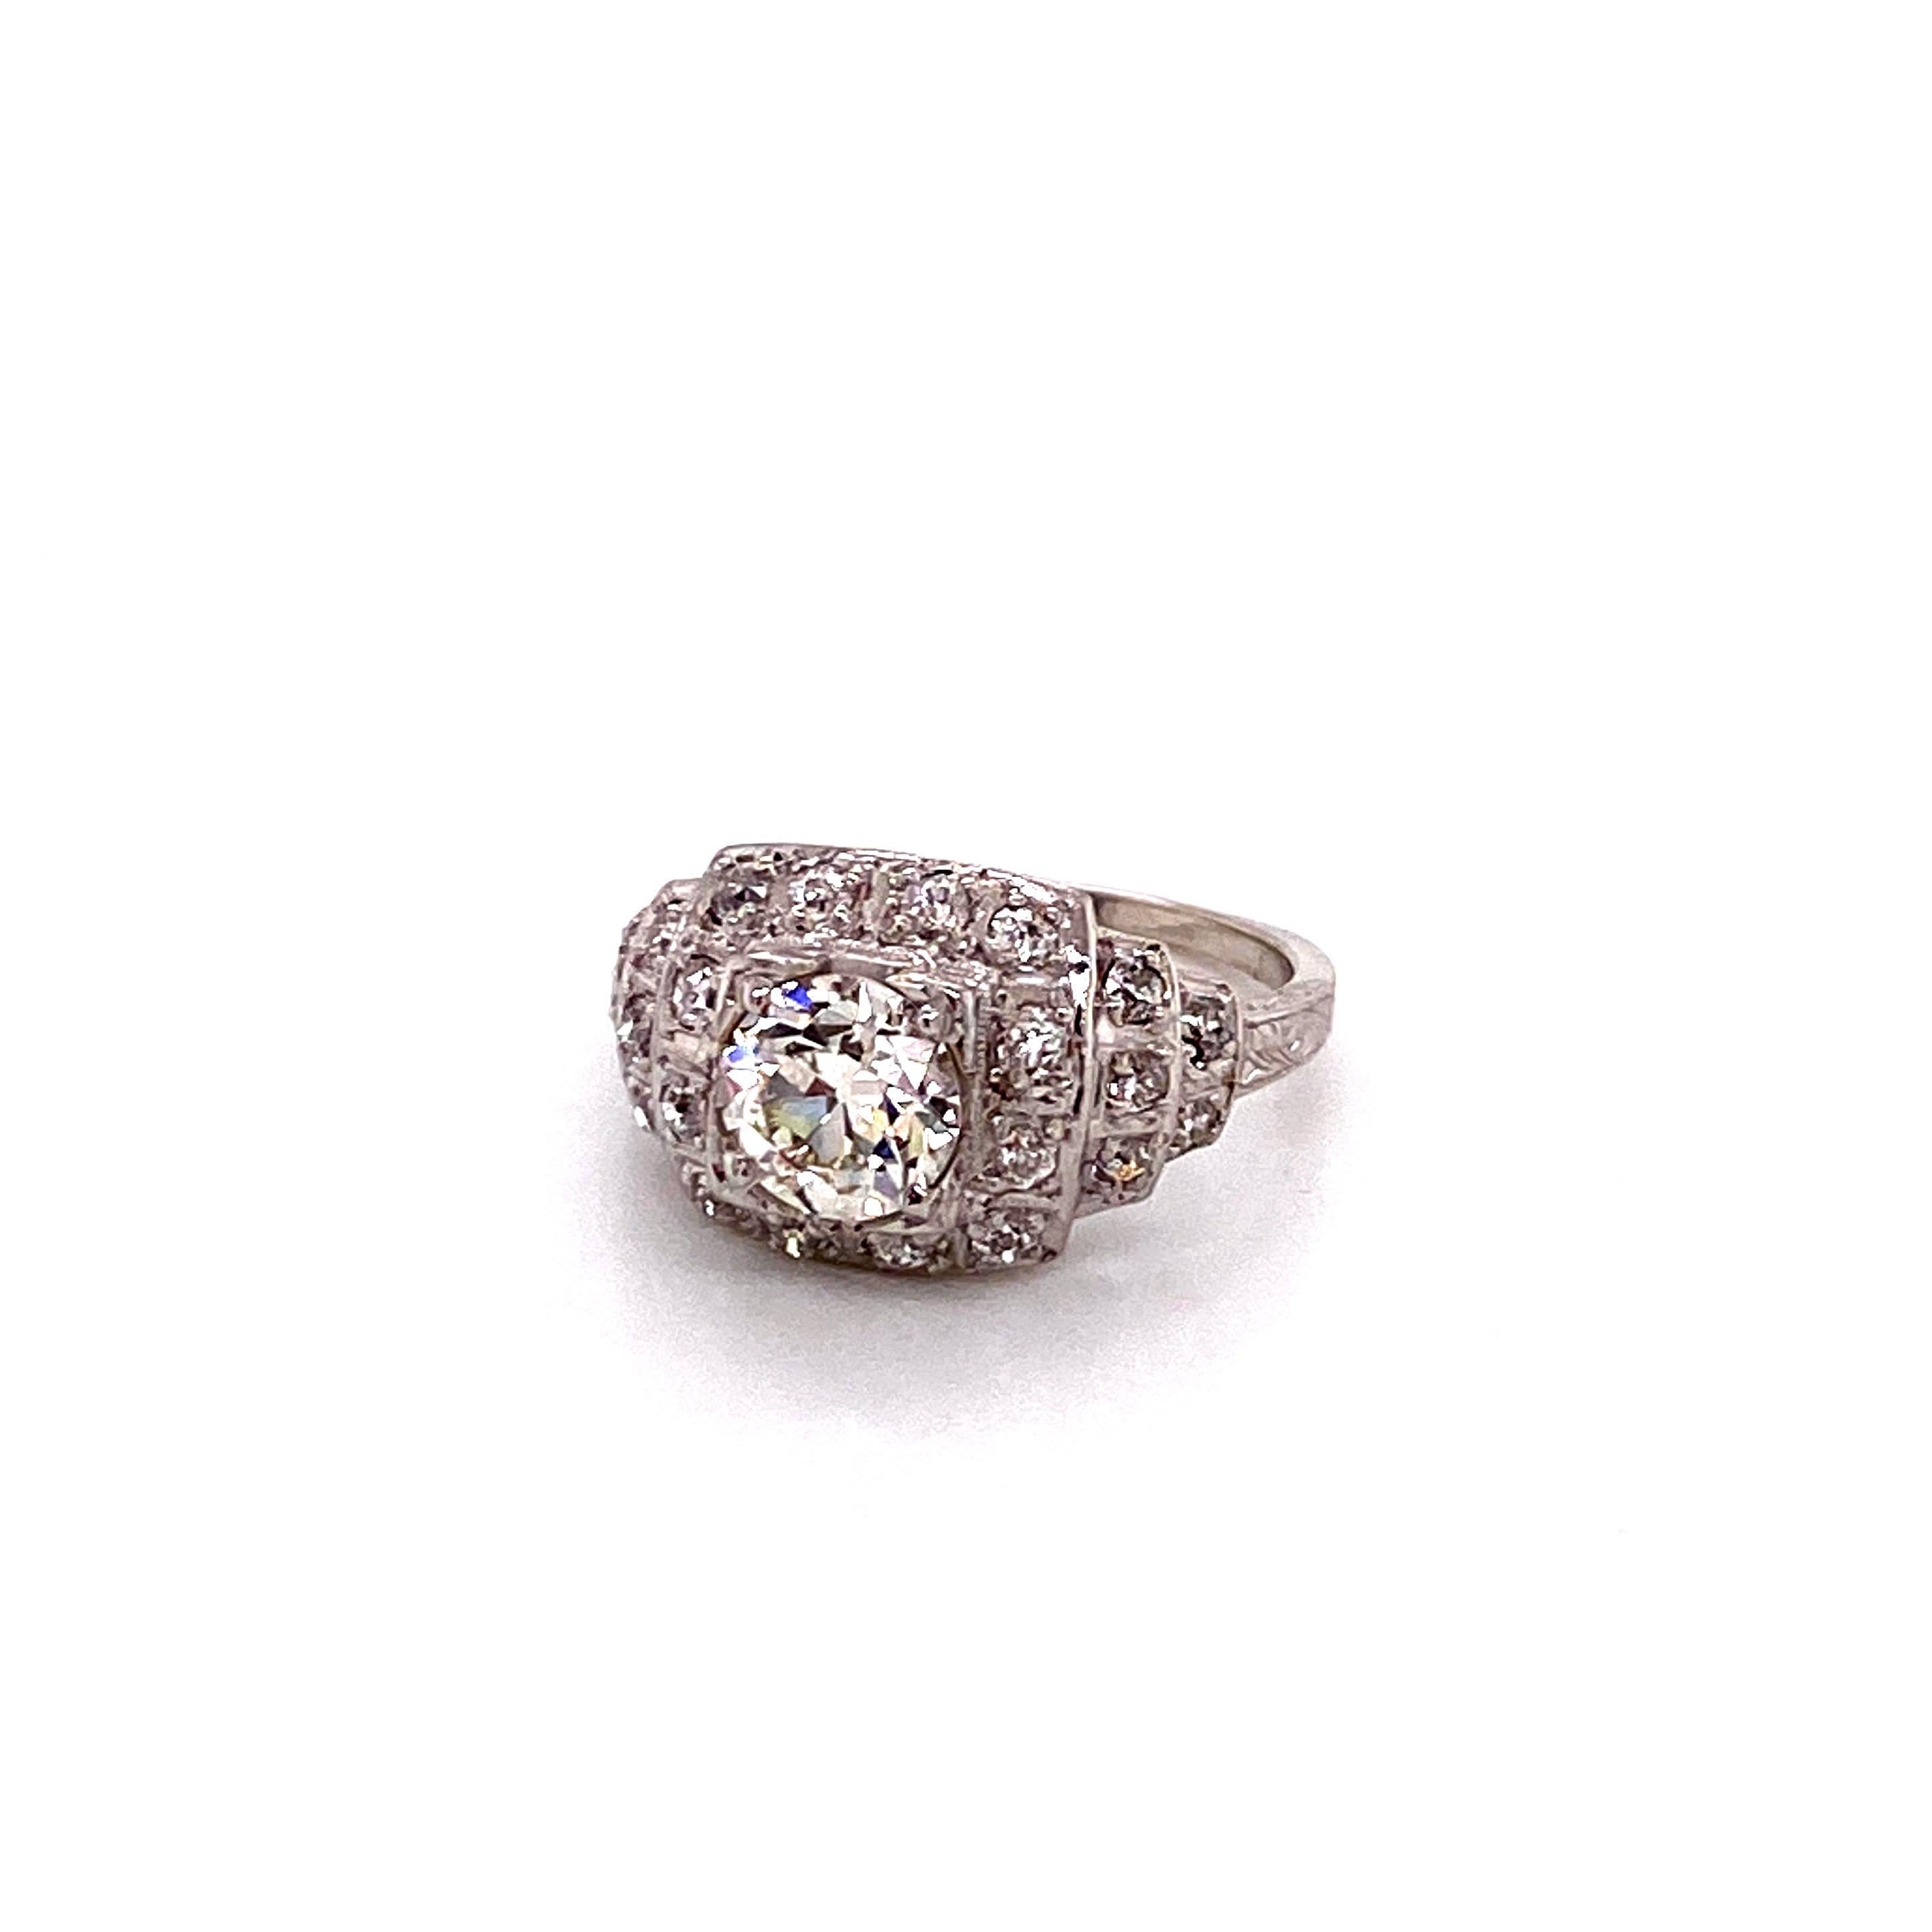 Antique 1920s European Cut Diamond Platinum Art Deco Ring - The center European Cut diamond weighs 1.17ct with K color and VS1 clarity. The diamond is set in a 3 tiered square Art Deco platinum setting containing 22 Miner cut diamonds that weigh